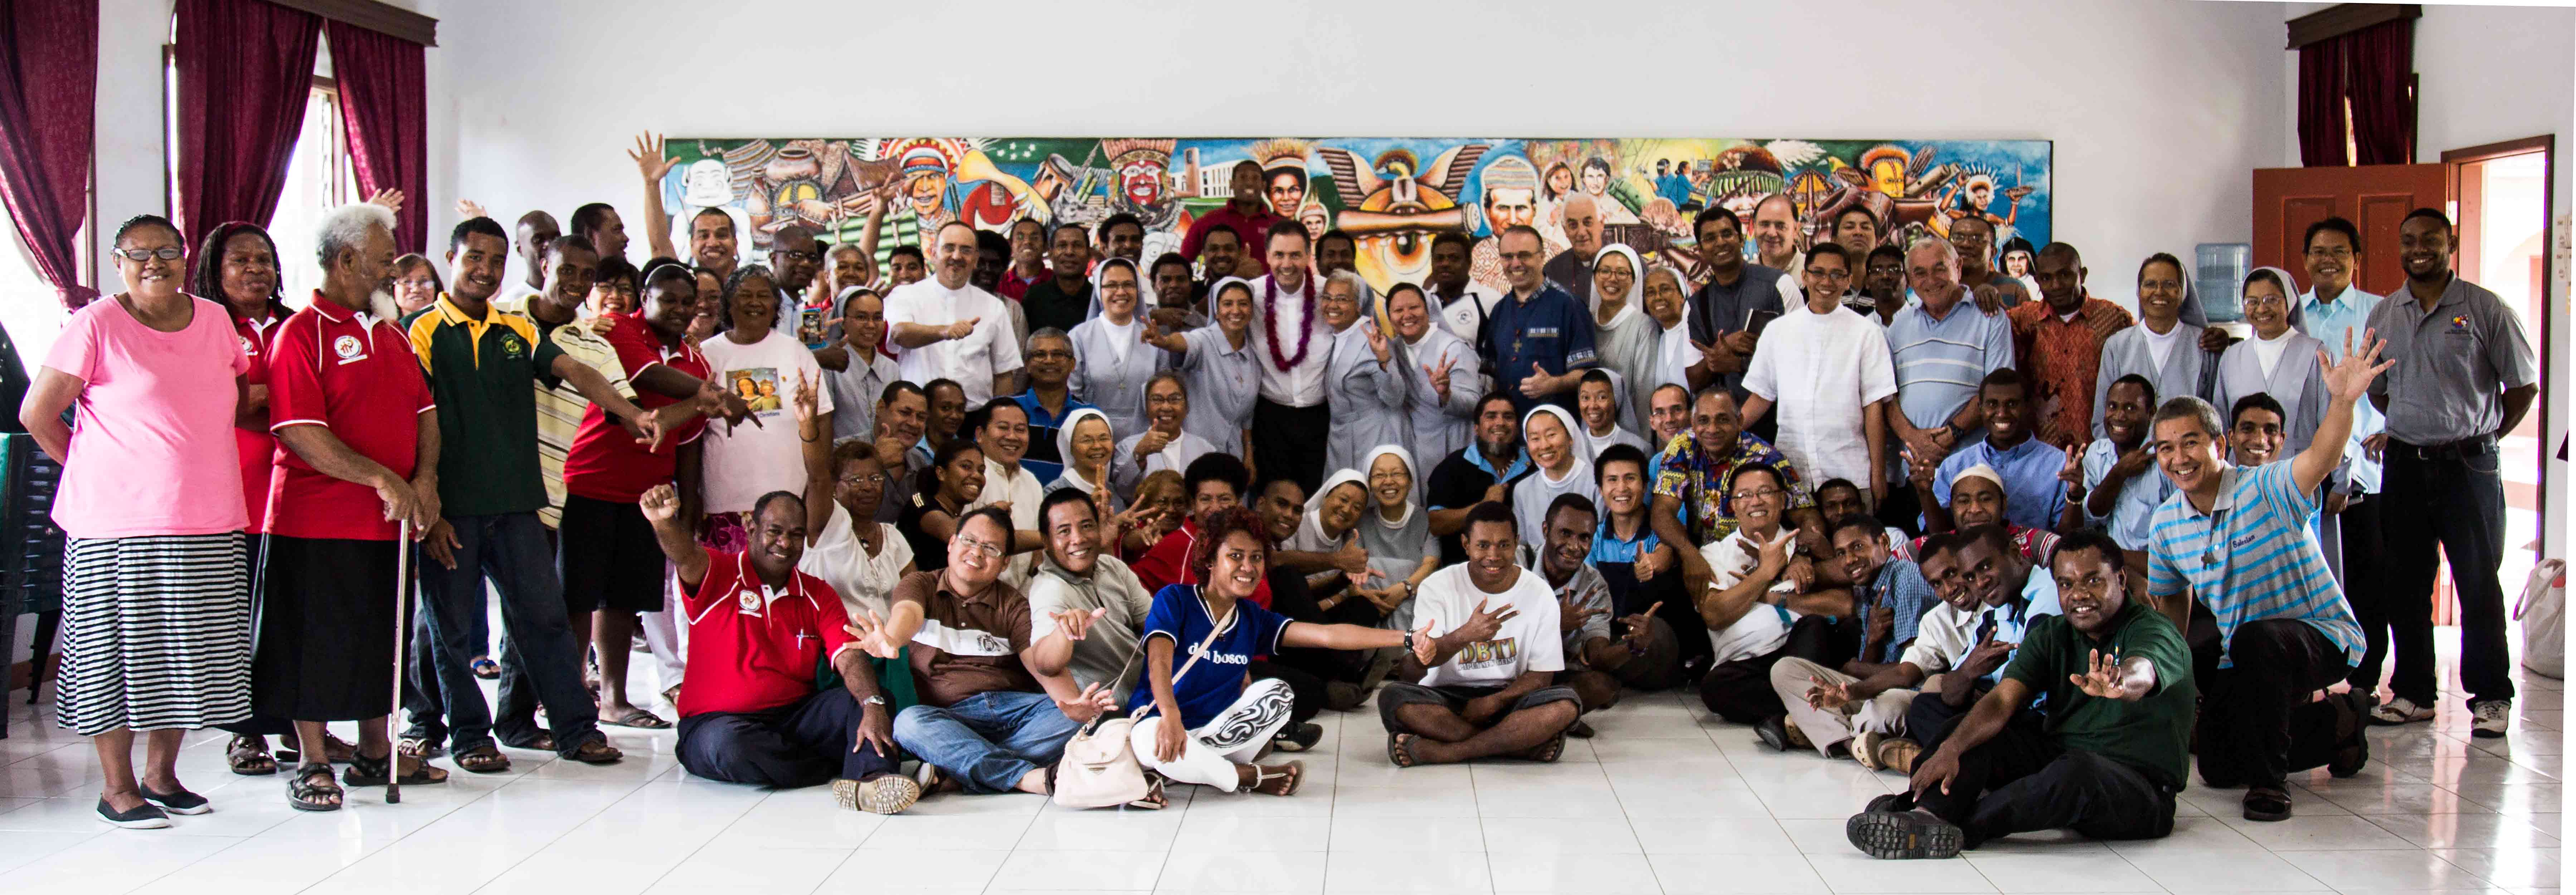 PNG-last day meeting RM-salesian family open forum.jpg